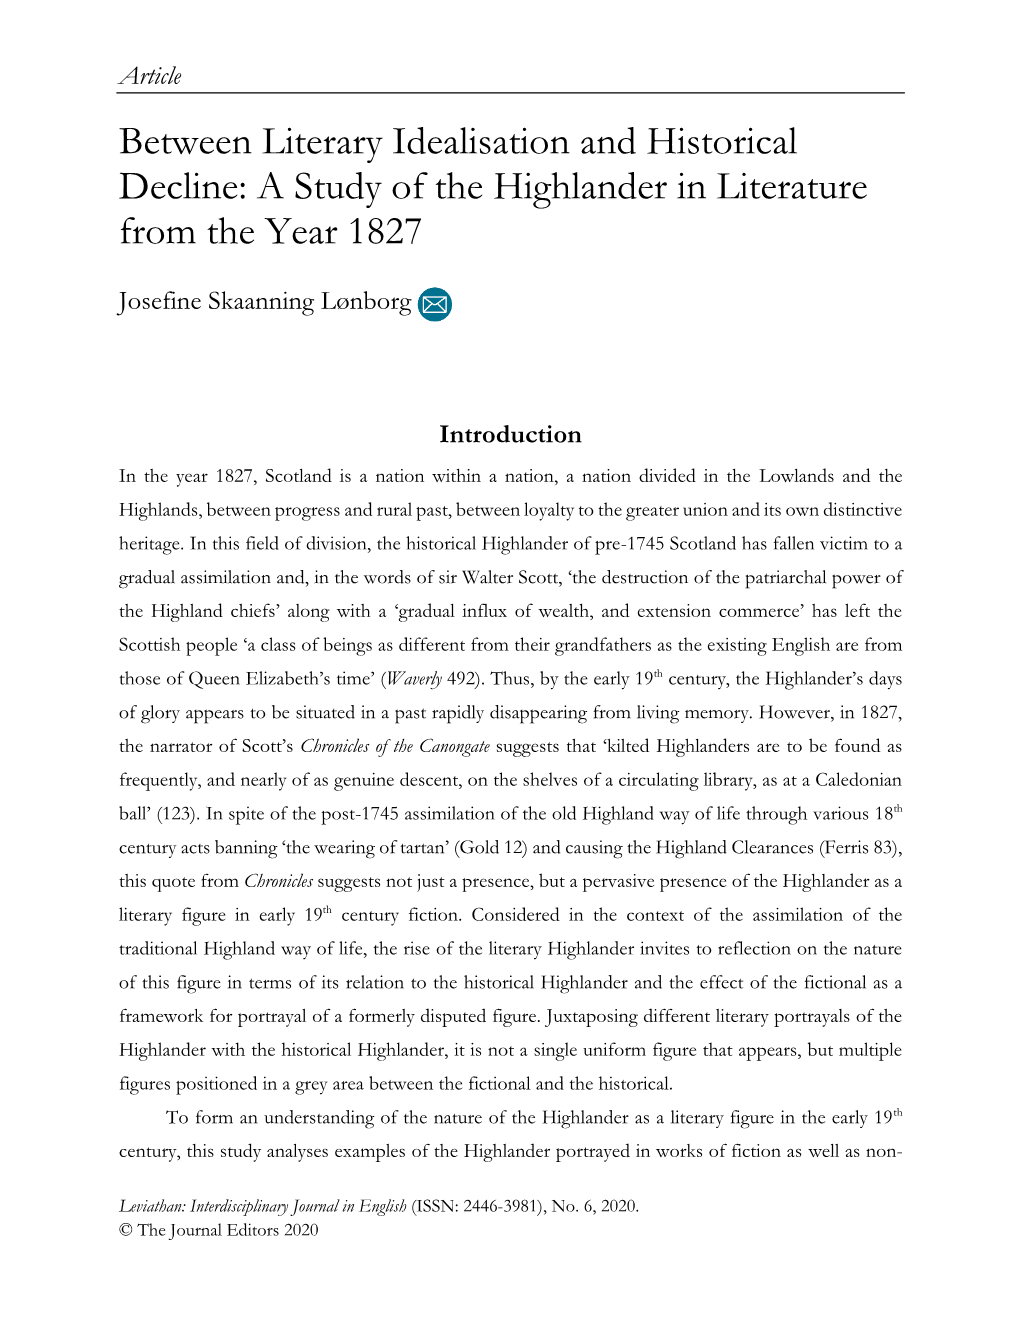 Between Literary Idealisation and Historical Decline: a Study of the Highlander in Literature from the Year 1827